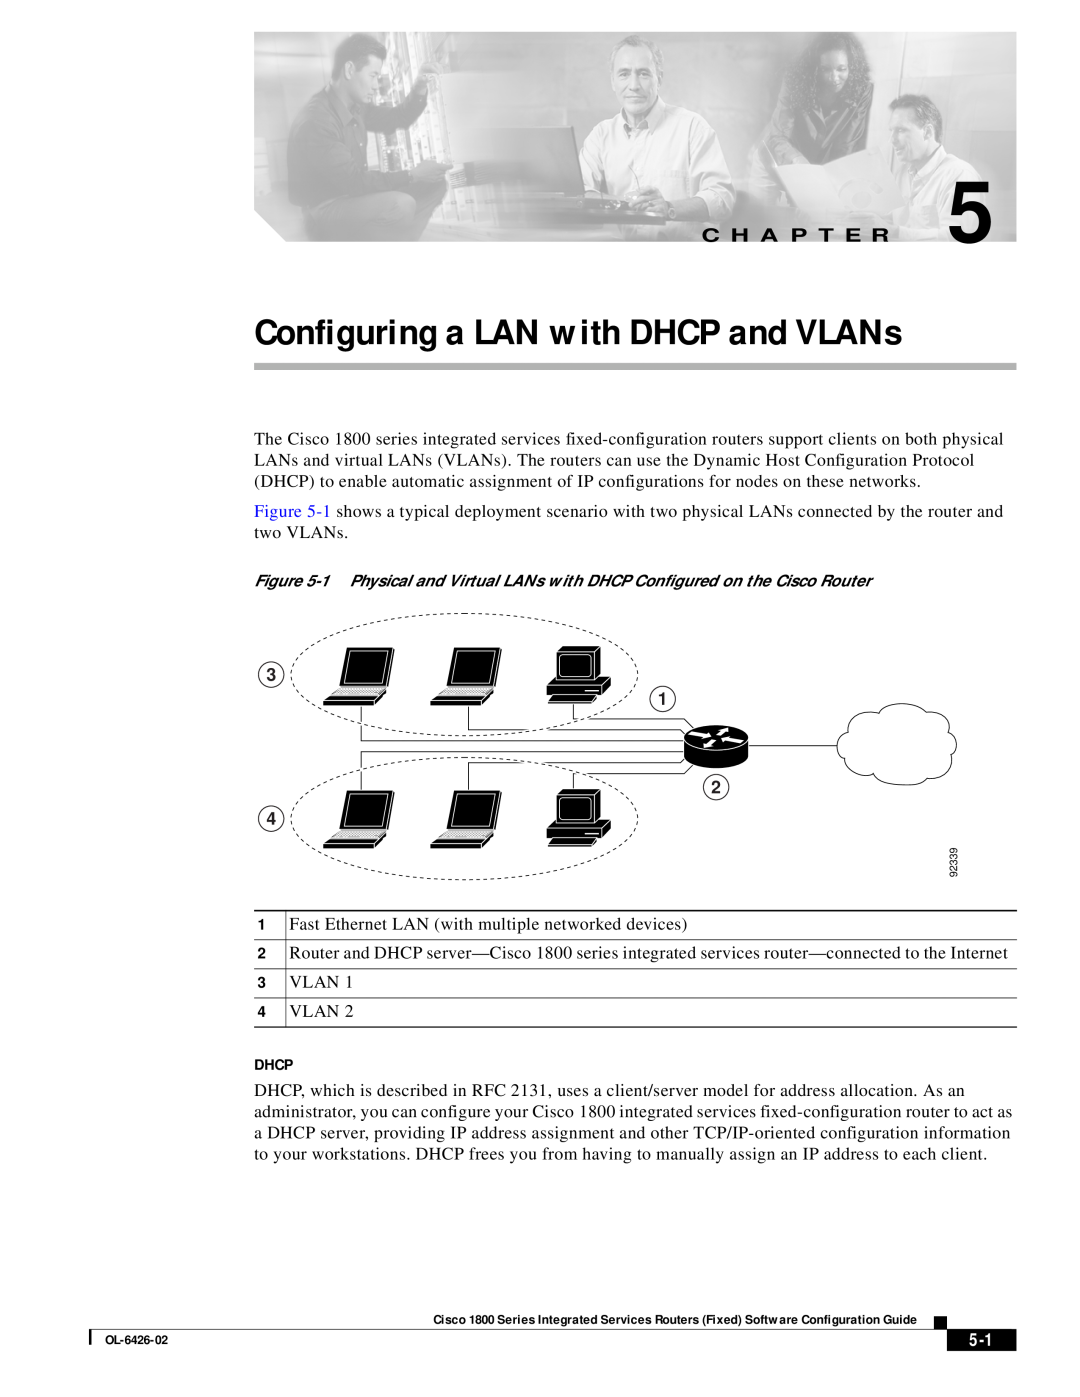 Cisco Systems 1800 manual Dhcp, Configuring a LAN with DHCP and VLANs, C H A P T E R 